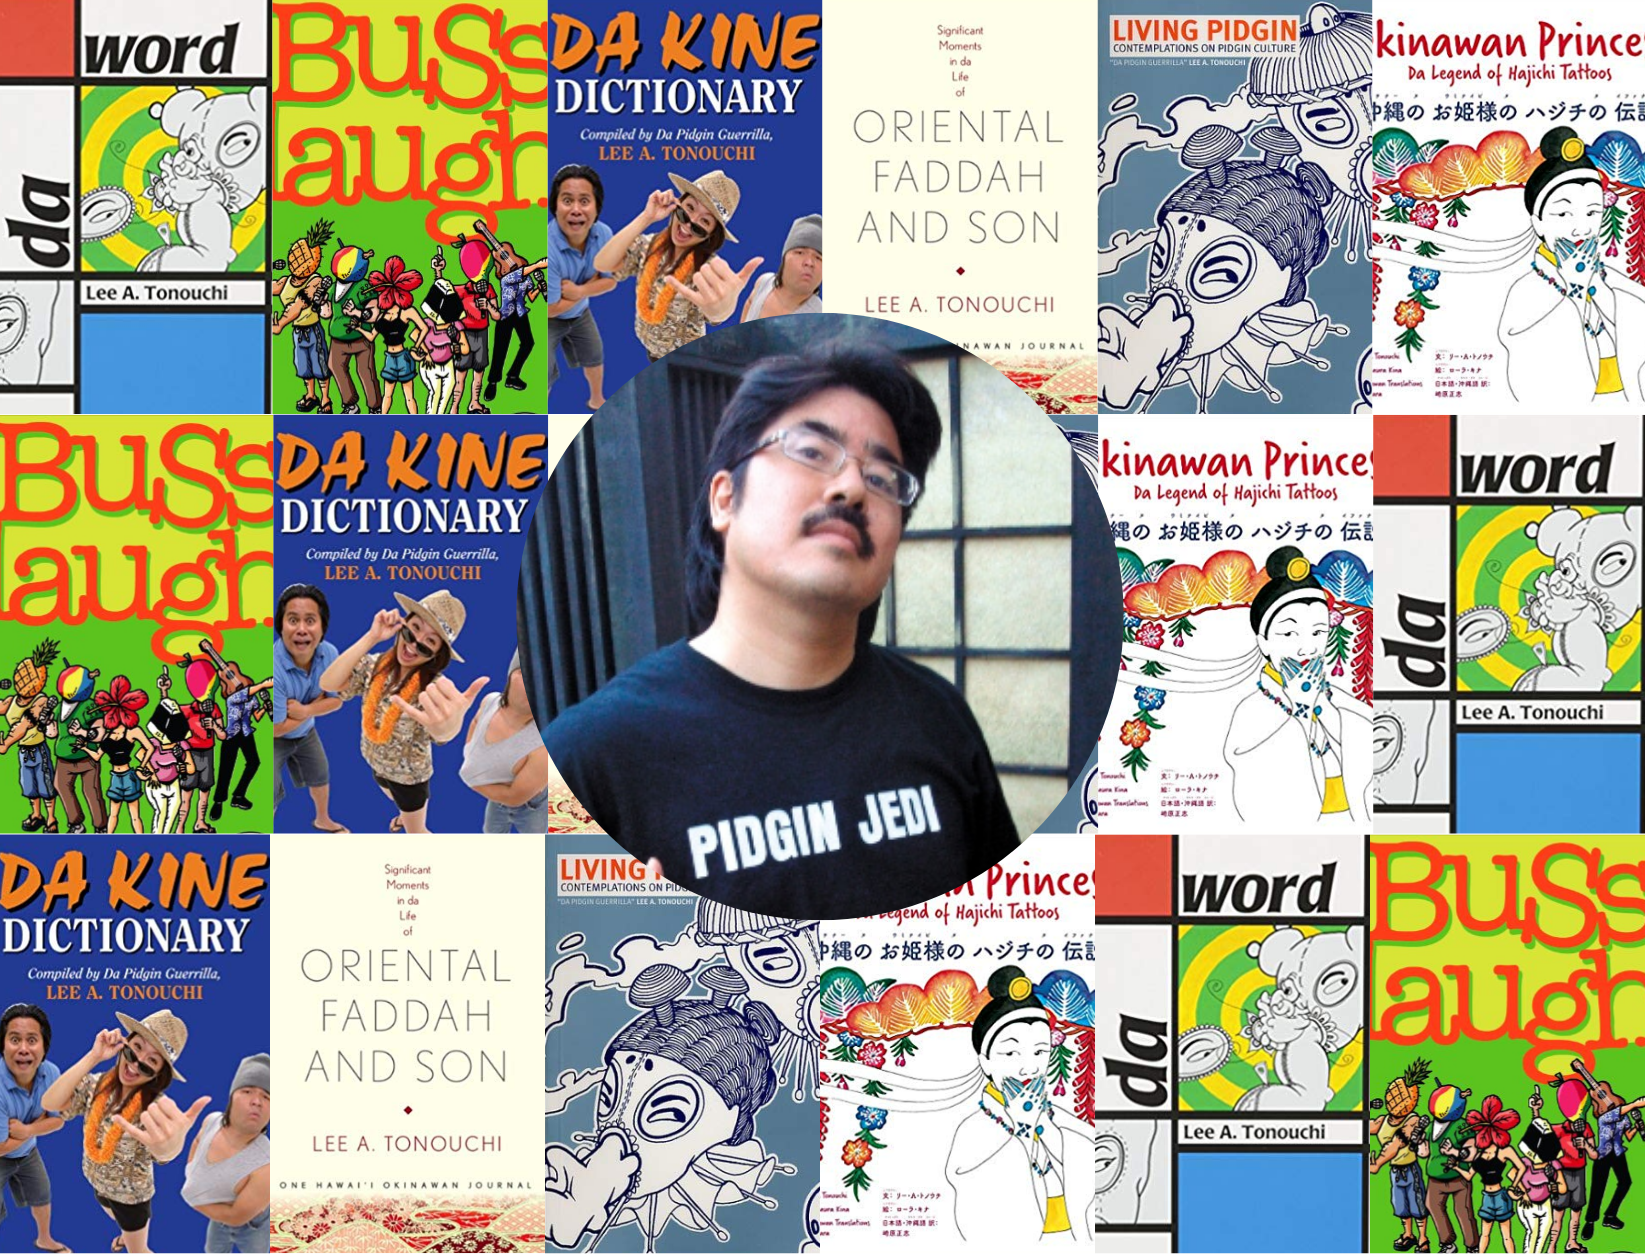 A picture of Lee Tonouchi over a background of his book covers.